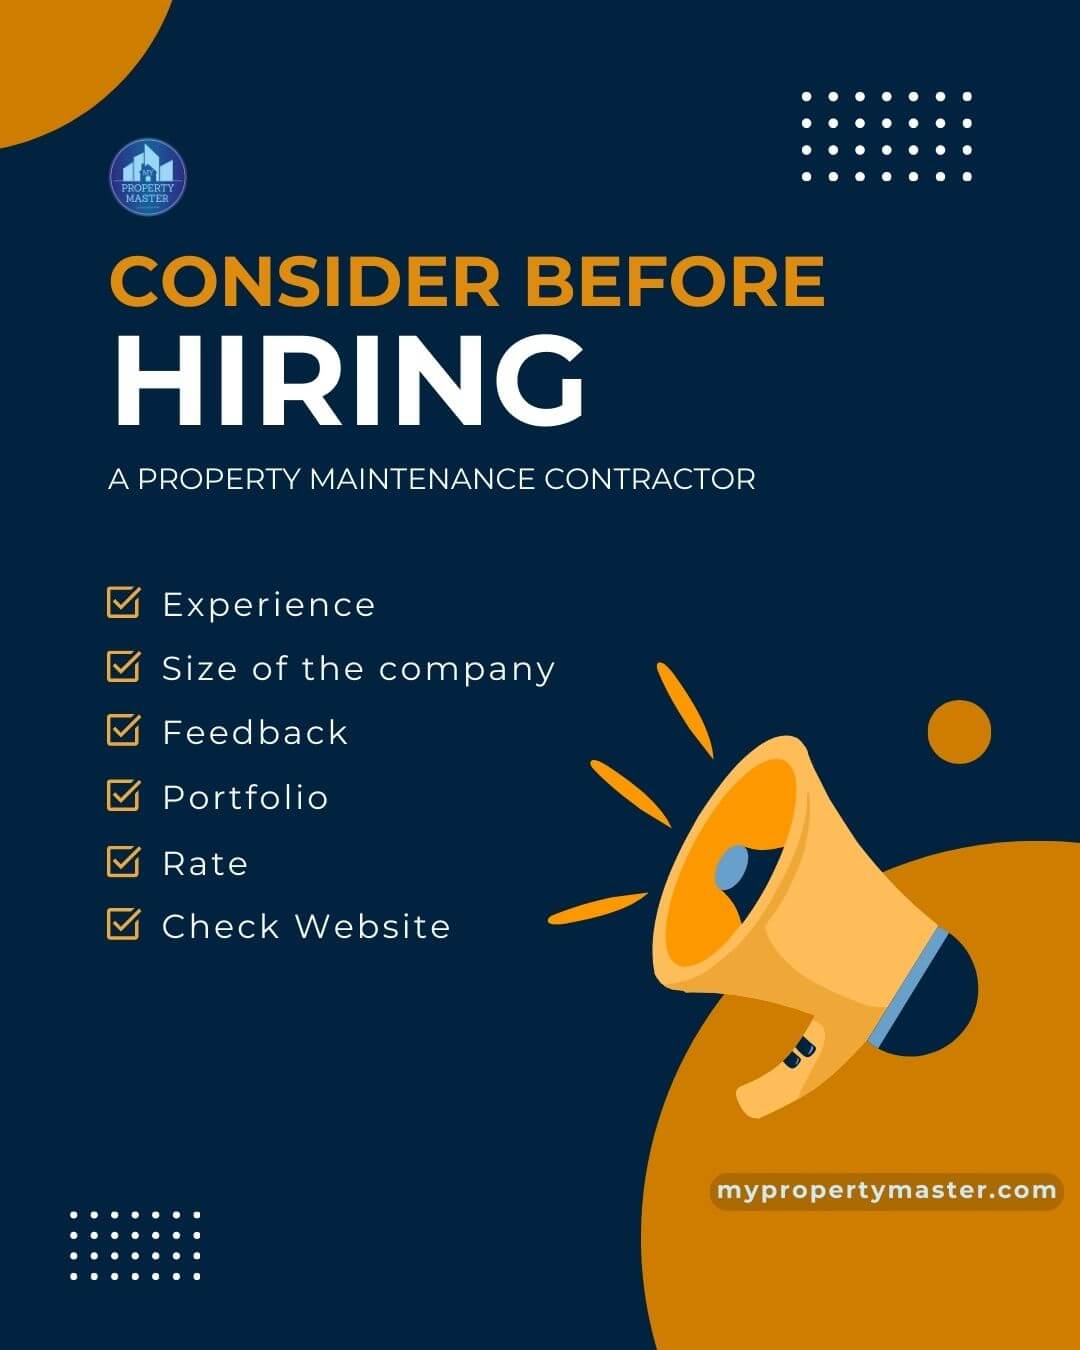 Things to consider before hiring a property maintenance contractor